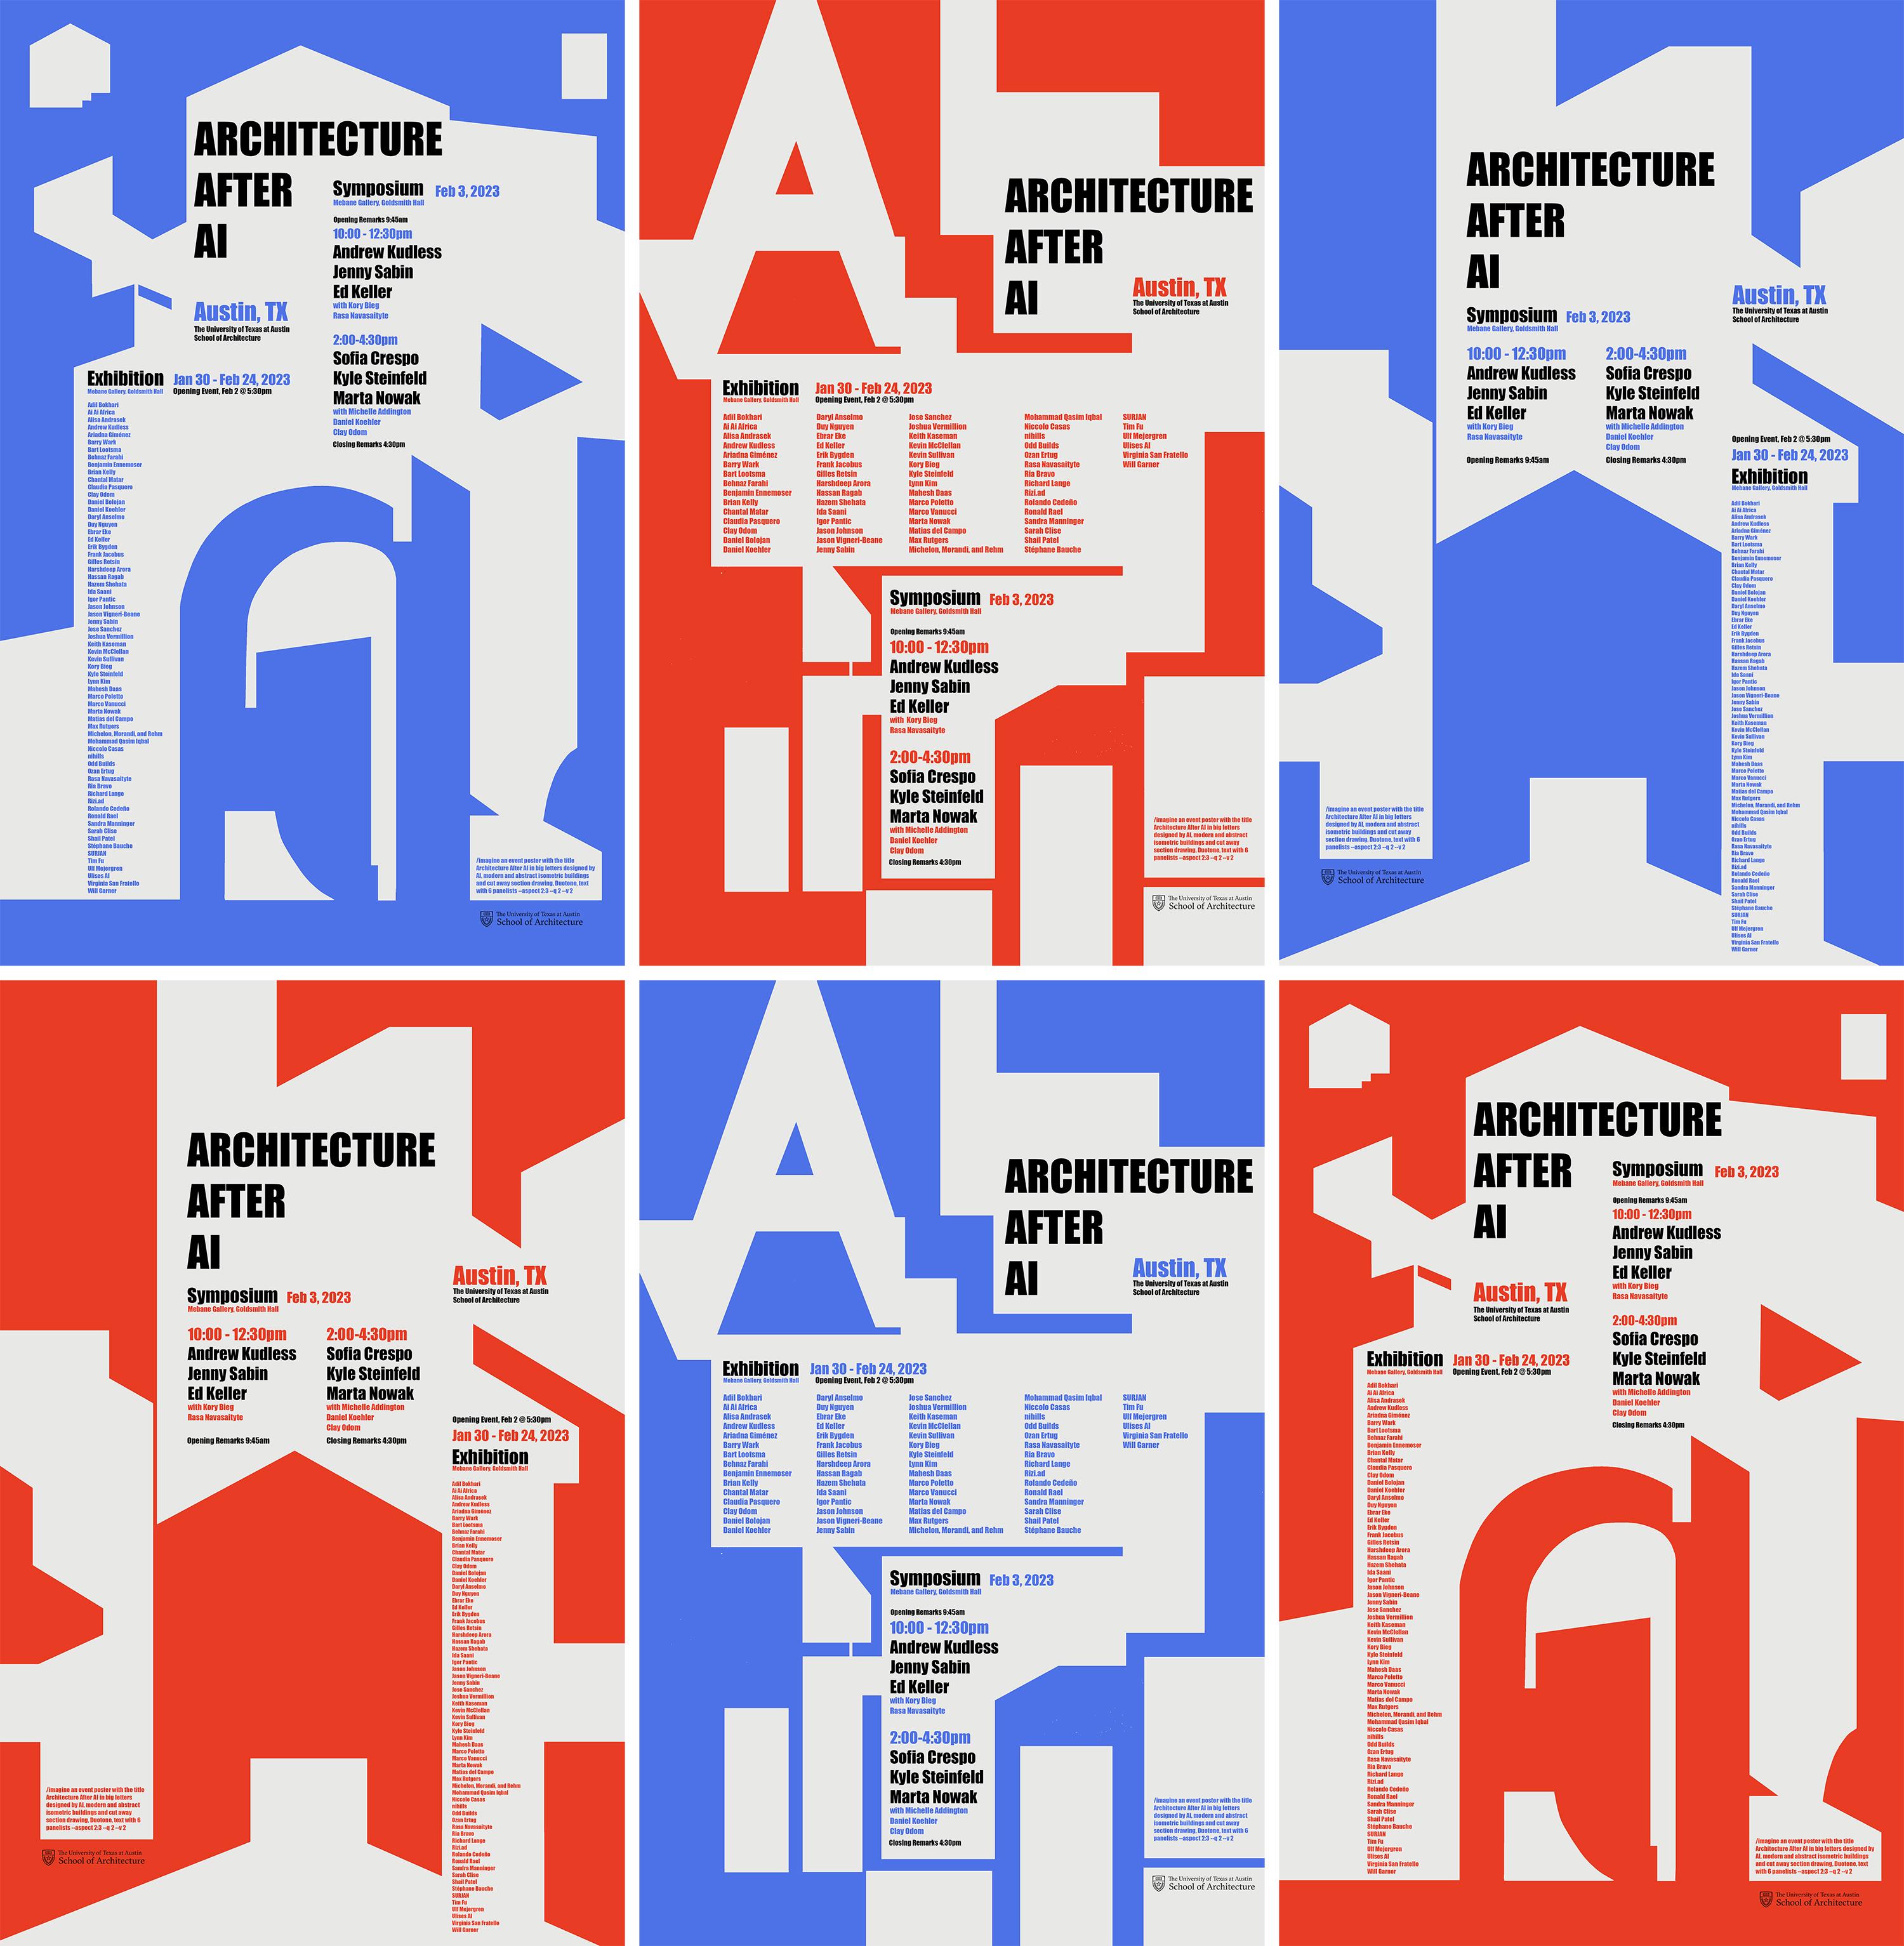 Six posters for the Architecture After AI exhibit laid out in a row, alternating between blue and red as the primary colors